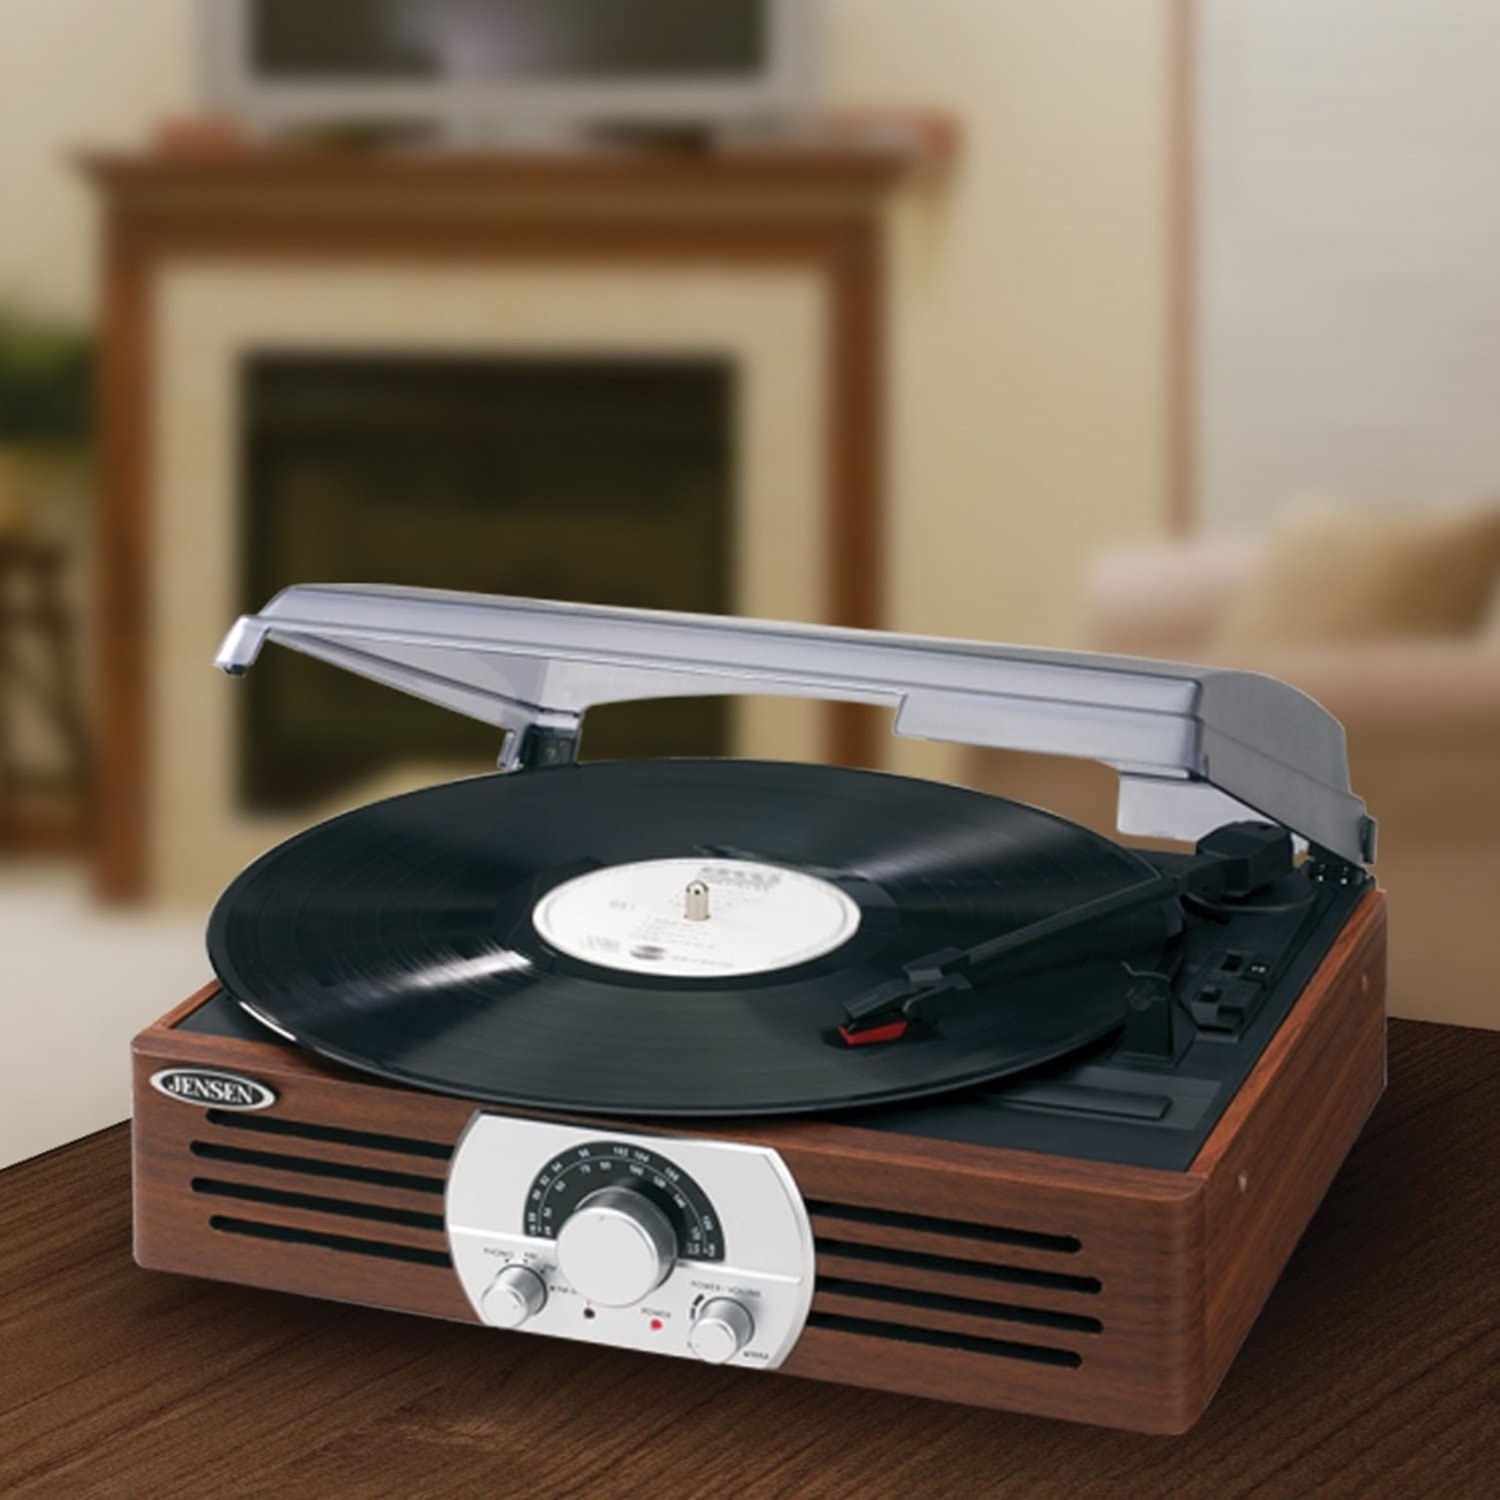 JENSEN JTA-222P Turntable with AM/FM And Pitch Control - image 4 of 6